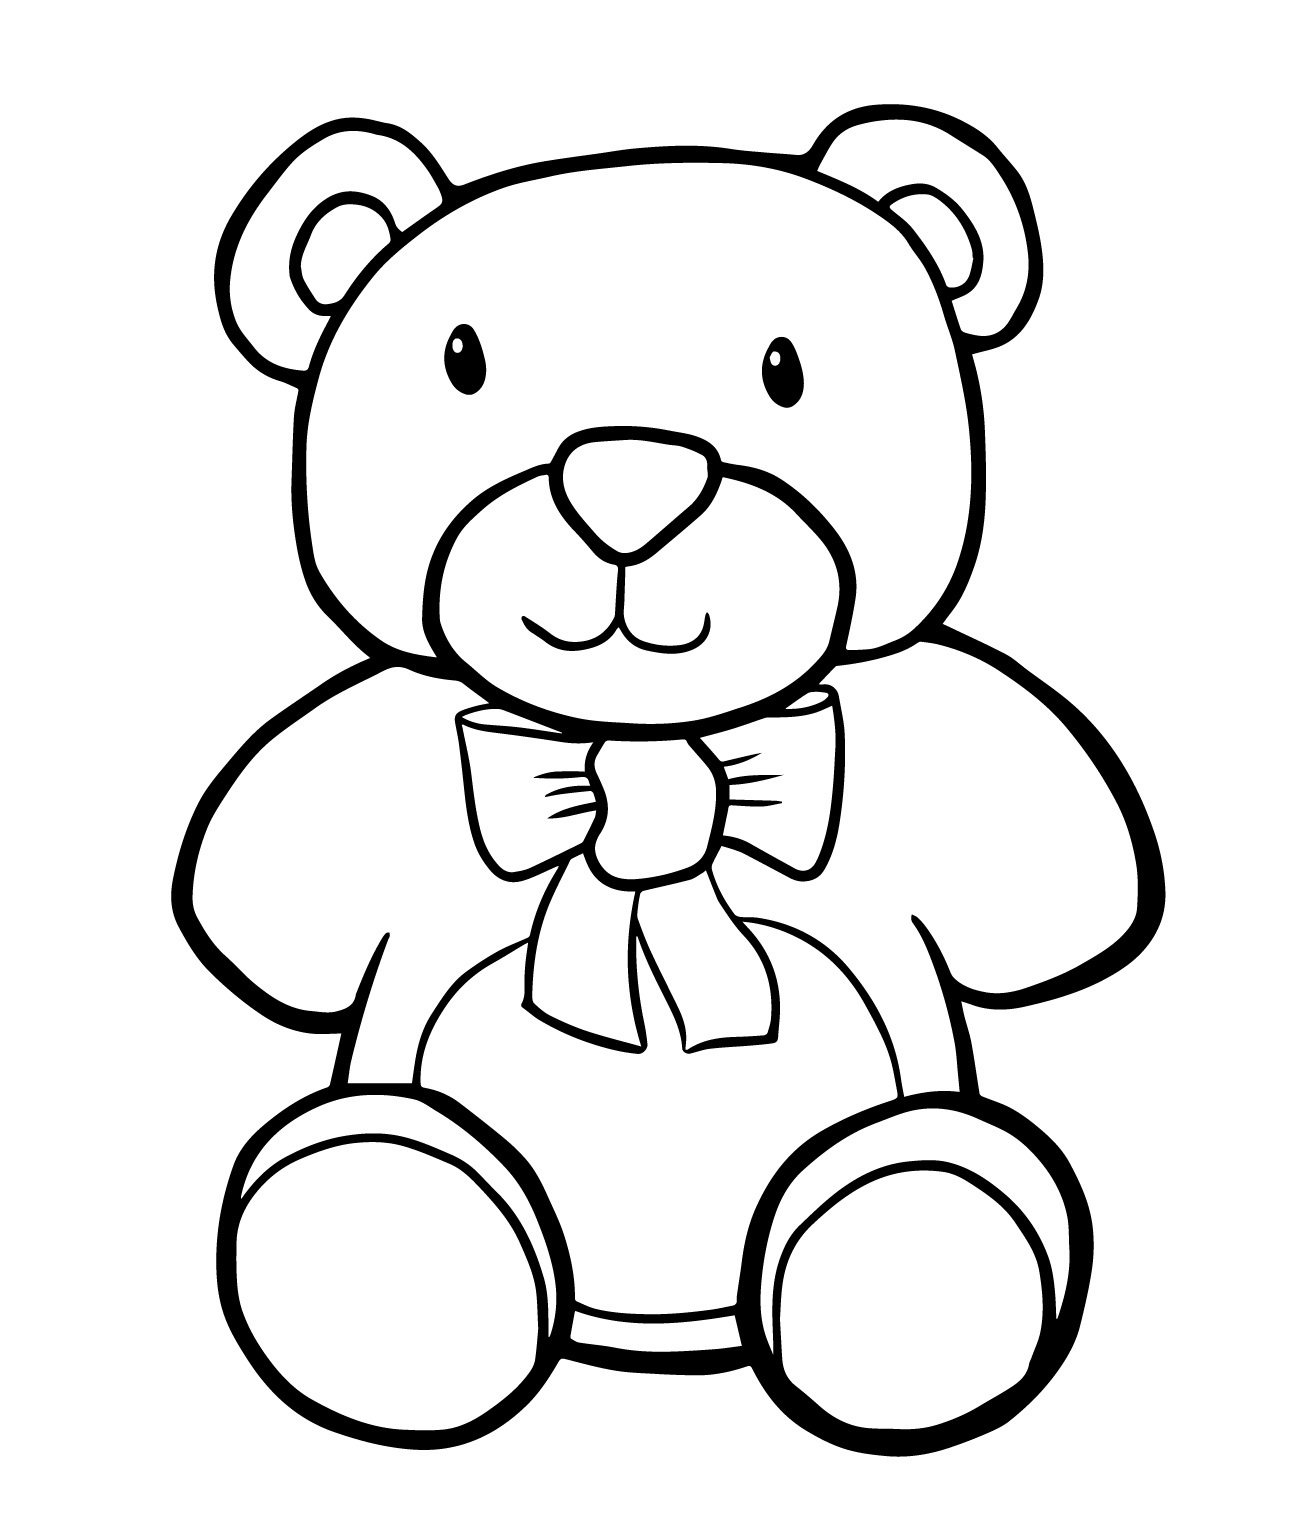 Toys Coloring Pages   Best Coloring Pages For Kids